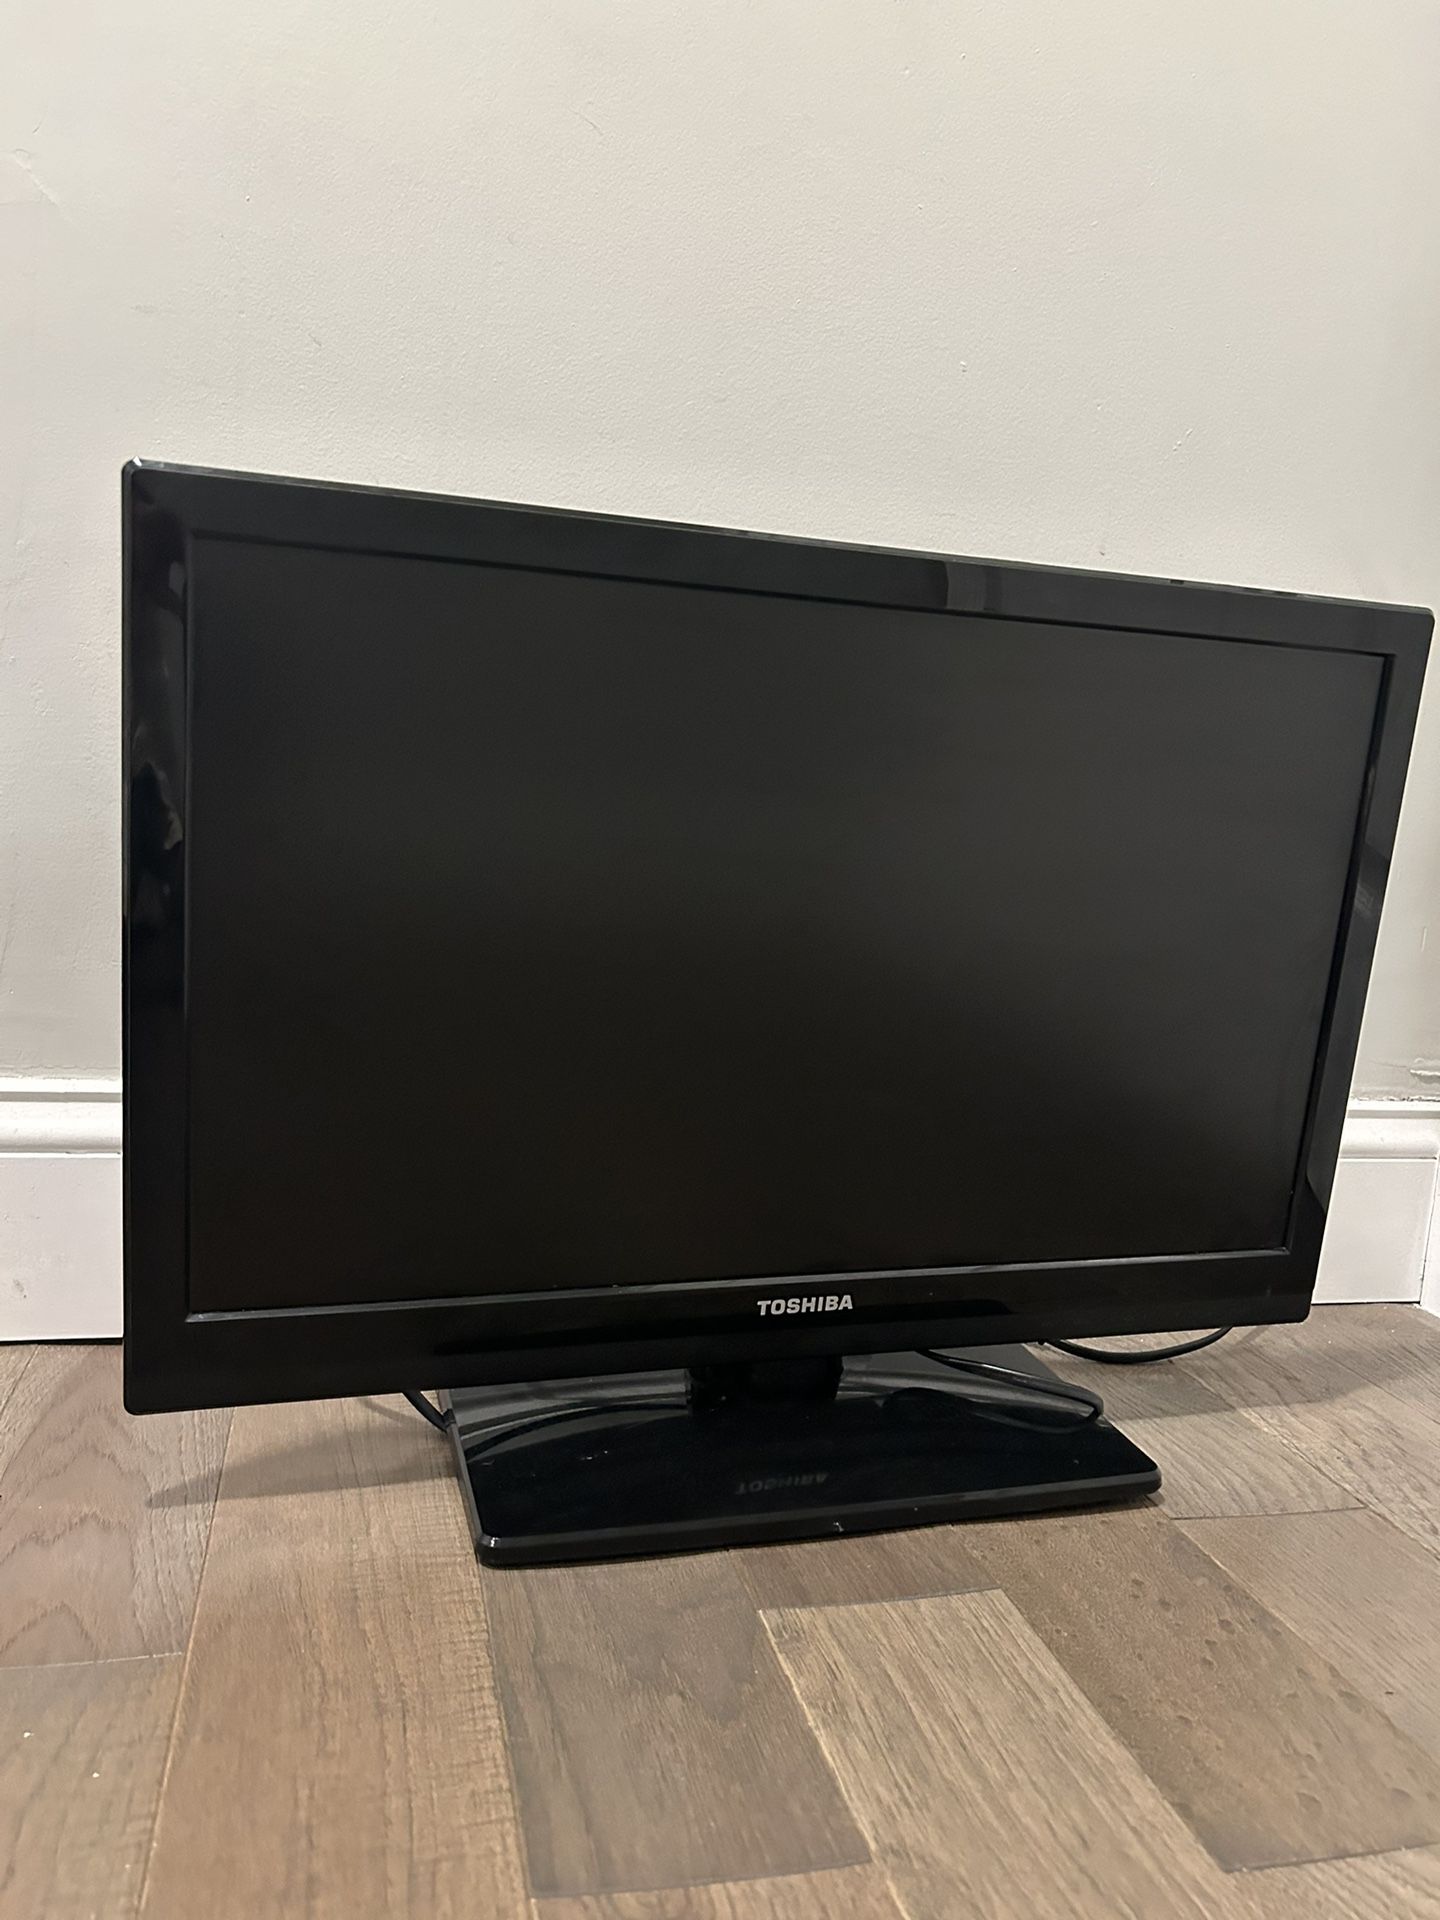 TOSHIBA TV for Computer /Gaming or to Watch On